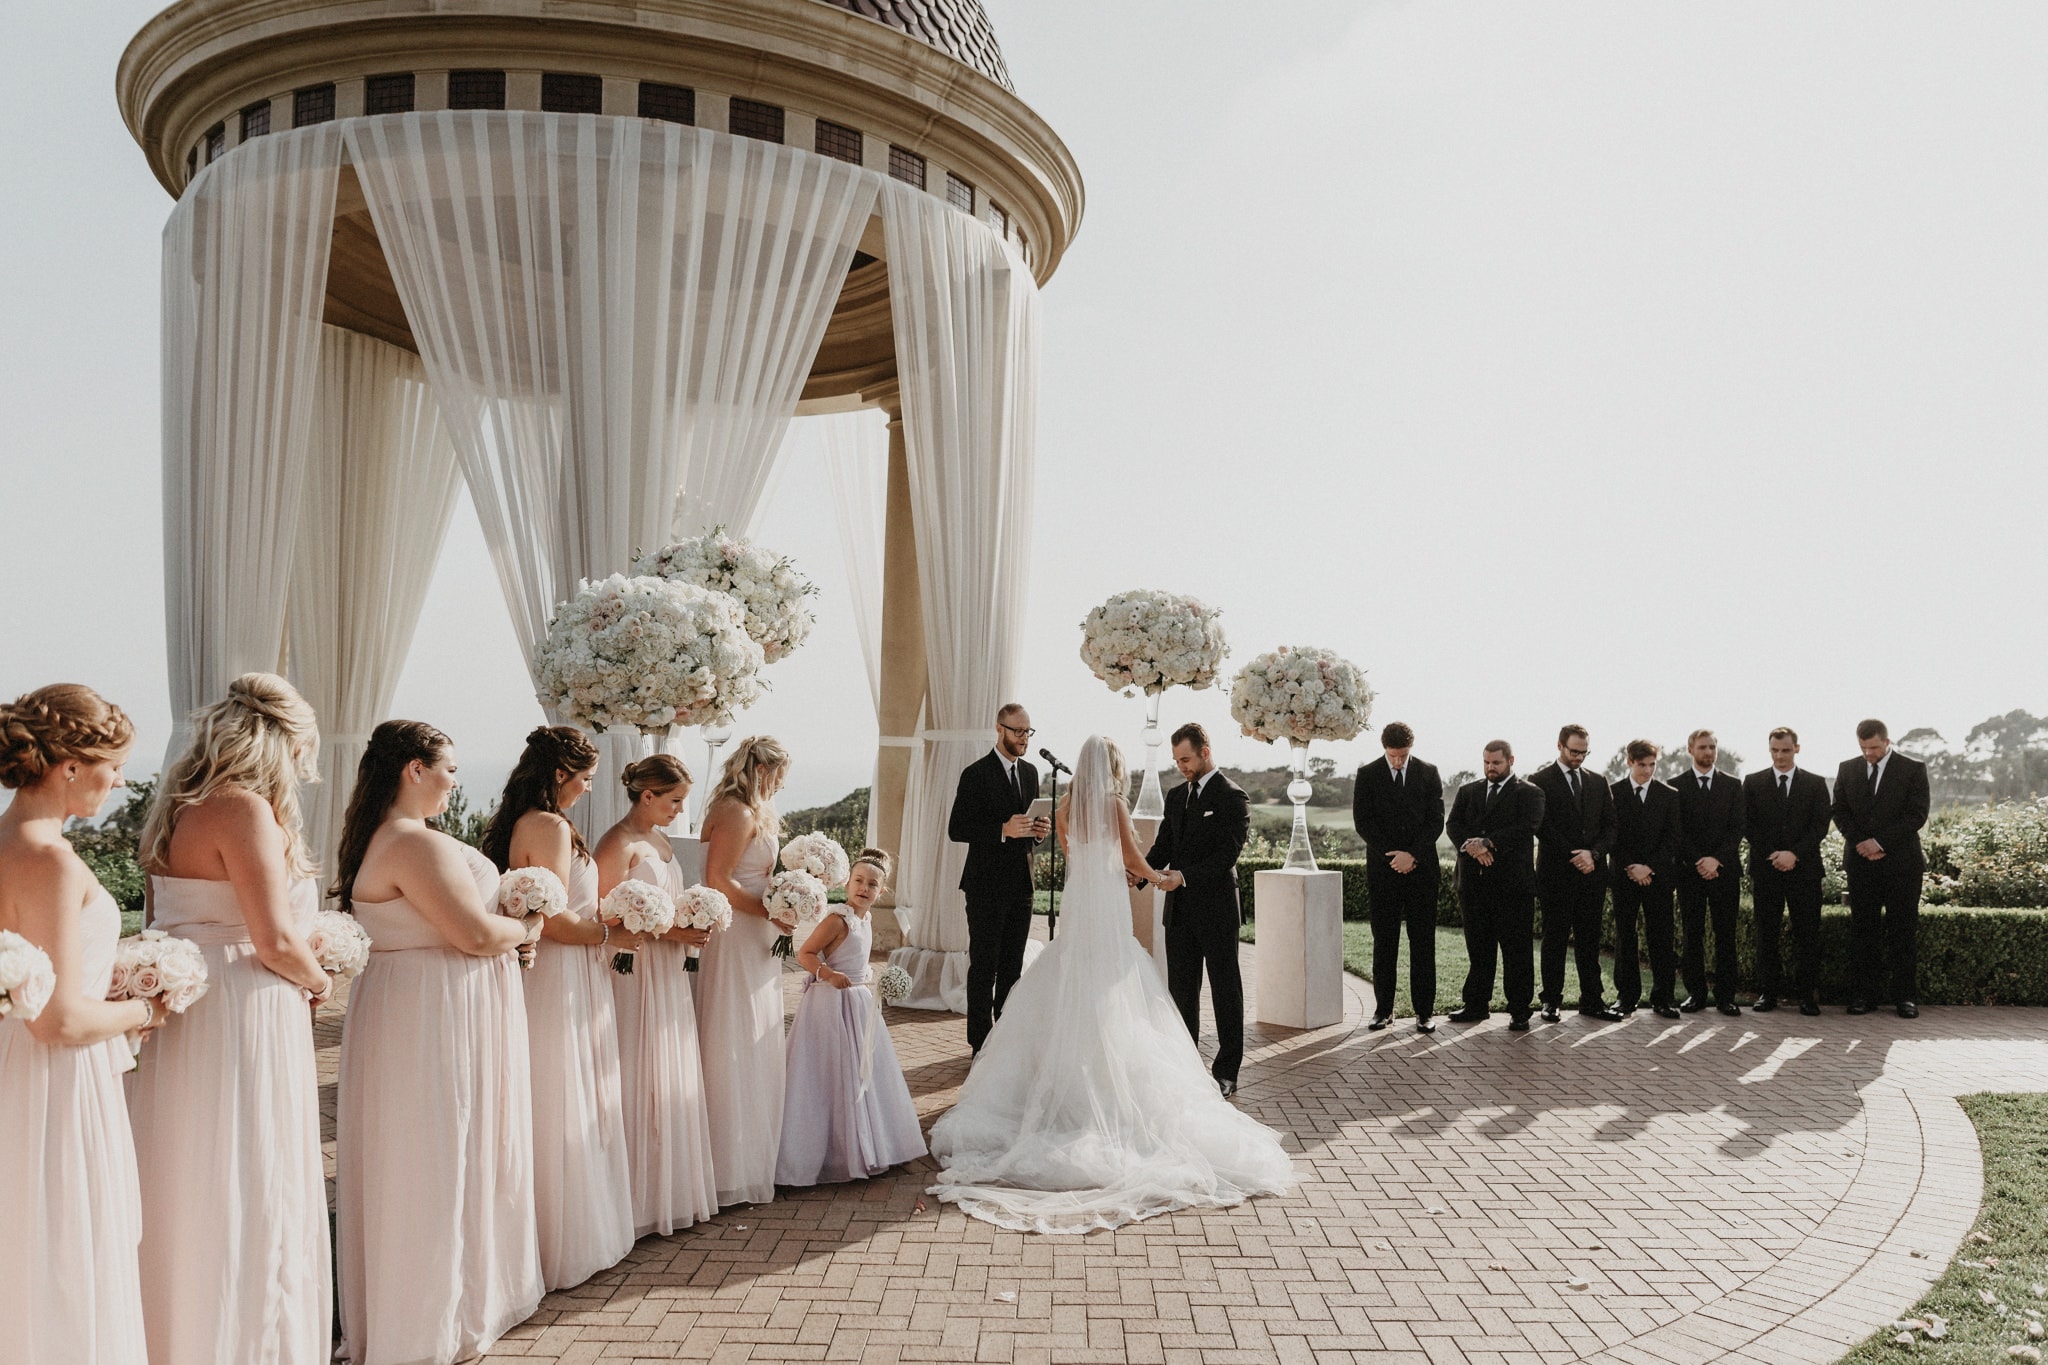 Bridesmaids in blush pink dresses watch as the bride and groom exchange their vows at a Newport Beach wedding ceremony.